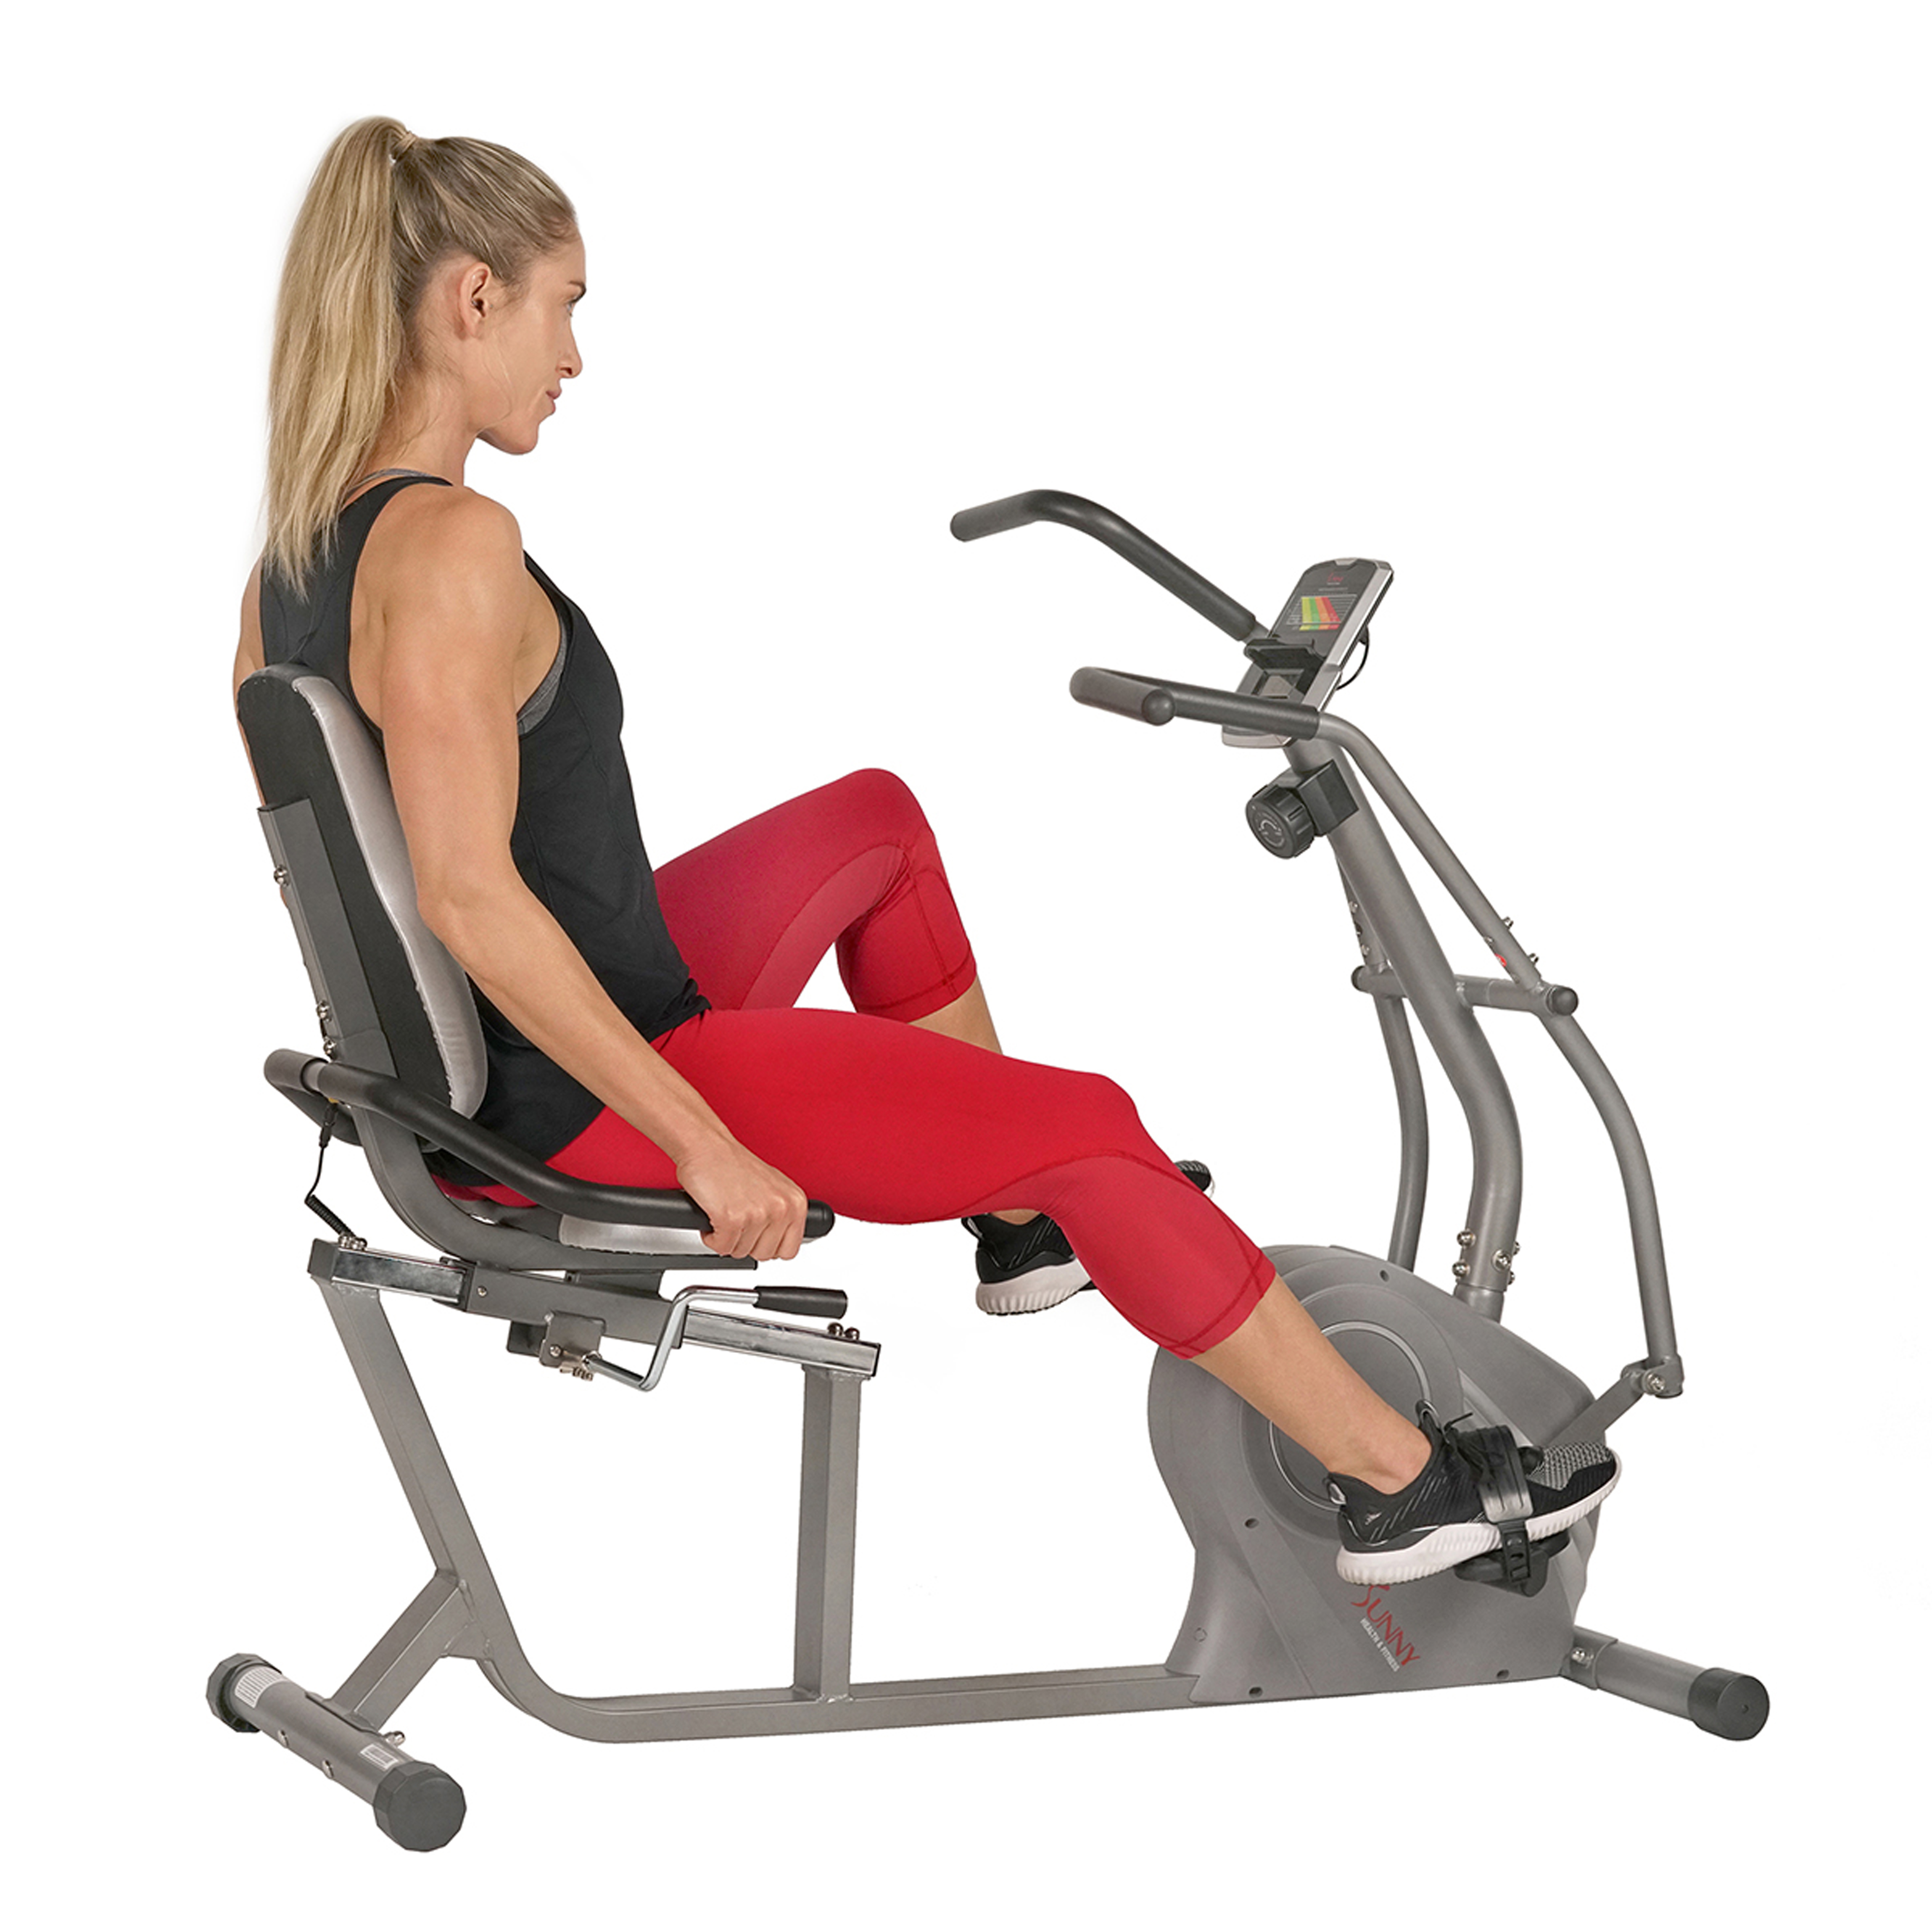 Sunny Health & Fitness Cross Trainer Magnetic Recumbent Bike with Arm Exercisers - SF-RB4936 - image 9 of 11